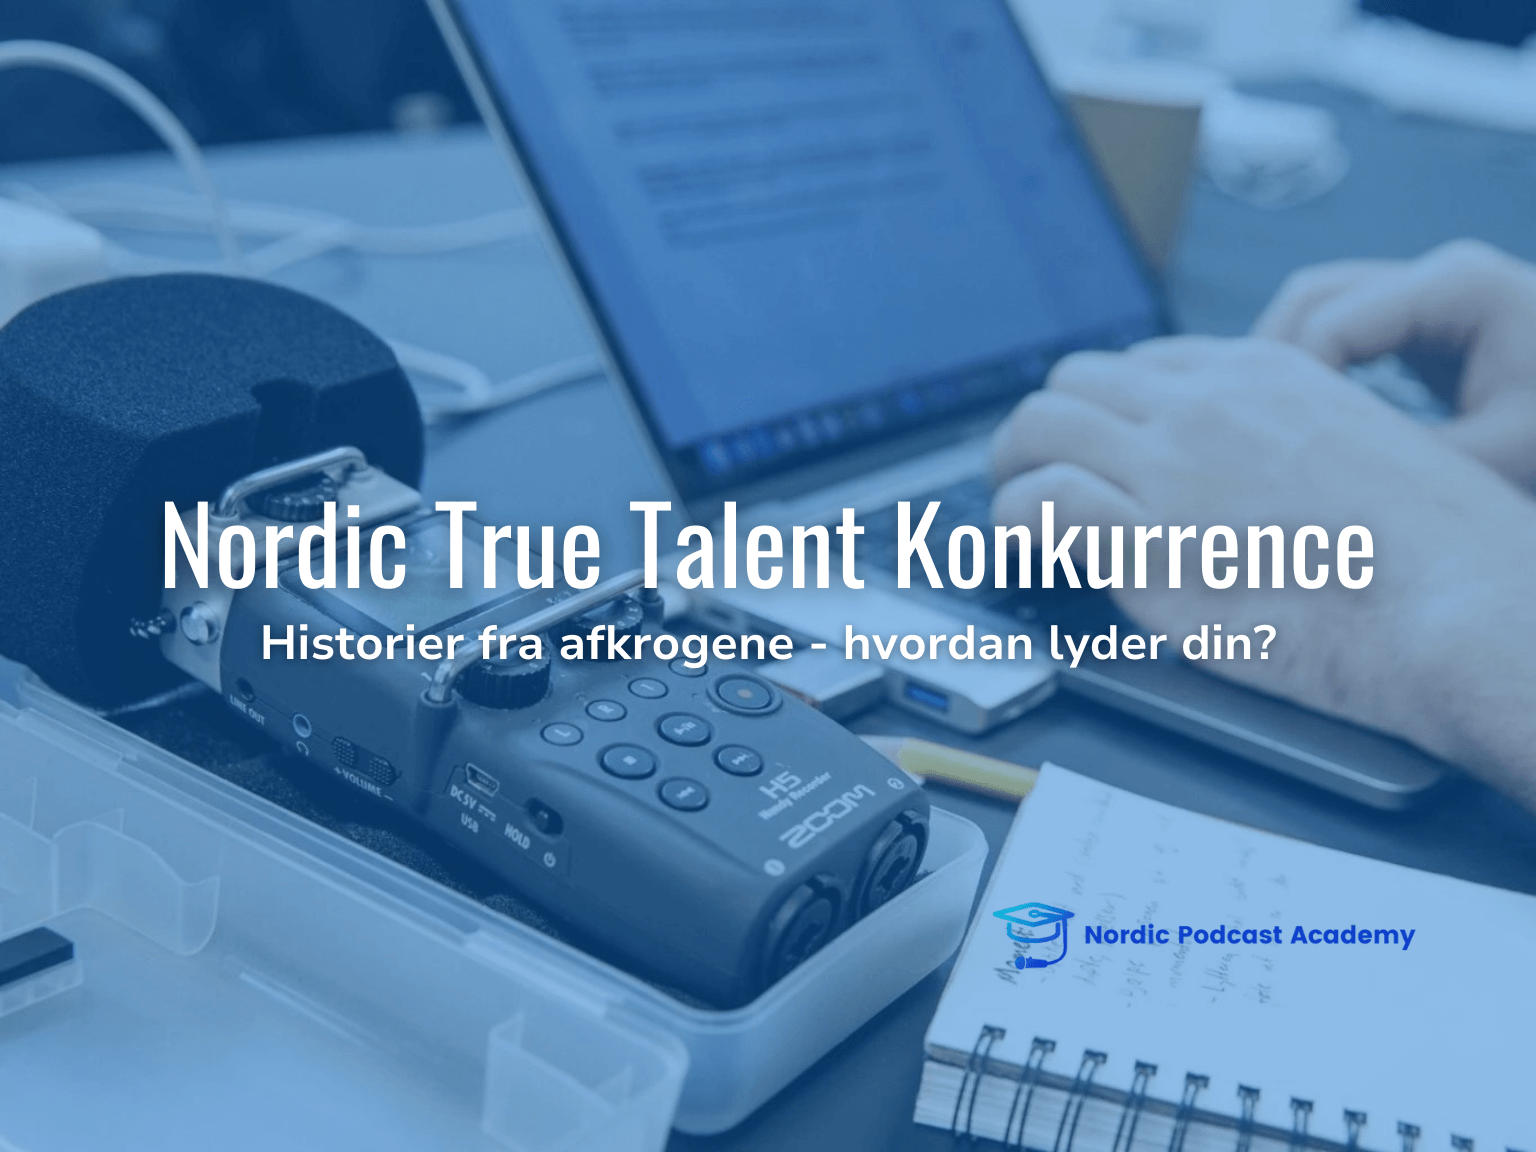 Featured image for “Nordic True Talent Konkurrence”